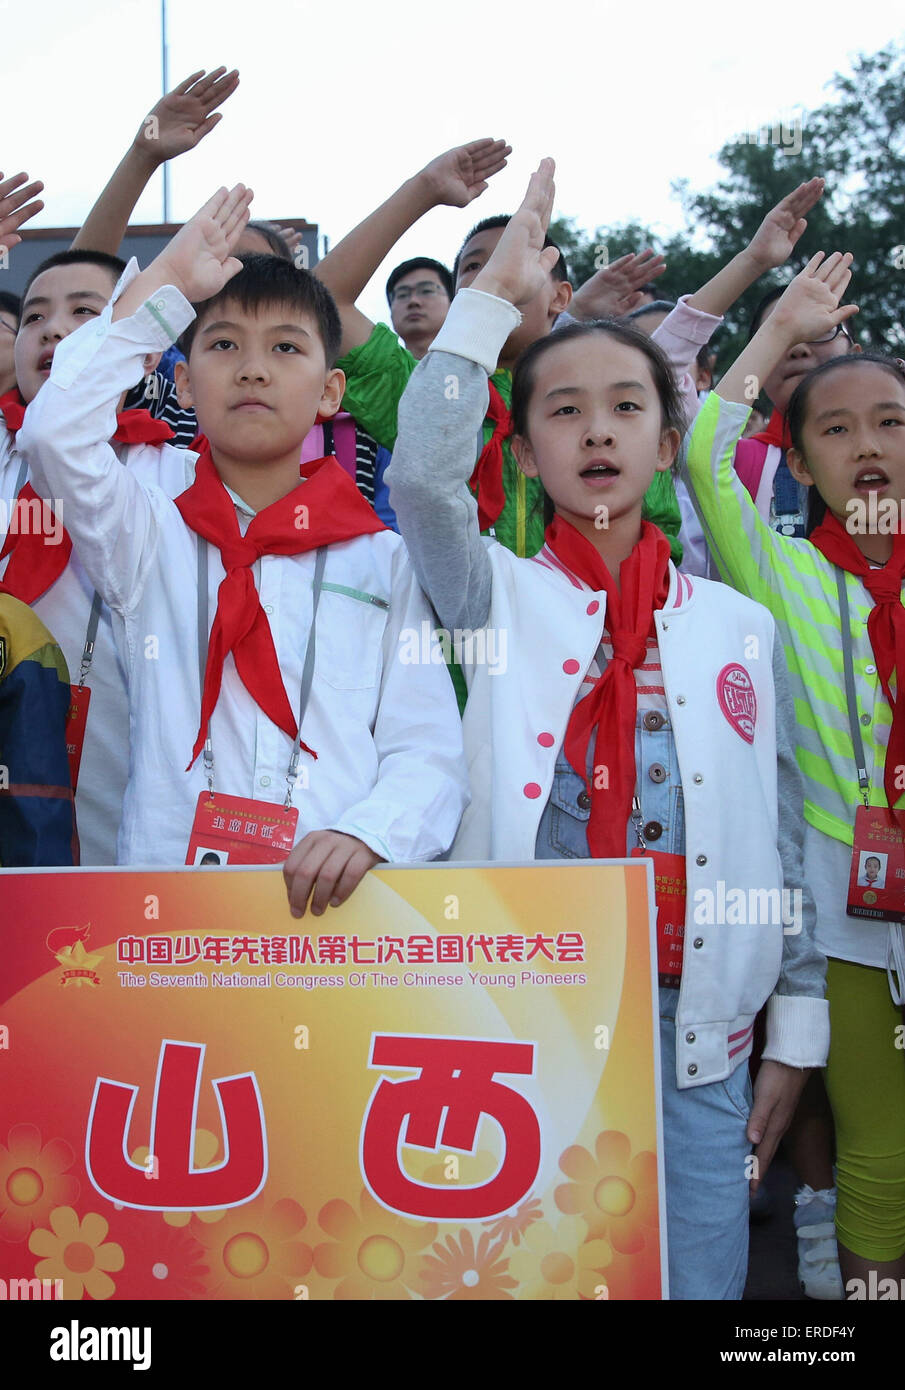 Beijing, China. 2nd June, 2015. Representatives attending the 7th National Congress of the Chinese Young Pioneers (CYP) raise hands in salute and sing national anthem as they watch national flag raising ceremony at the Tian'anmen Square in Beijing, capital of China, June 2, 2015. The 7th CYP National Congress was held here on Monday and Tuesday. © Wang Shen/Xinhua/Alamy Live News Stock Photo